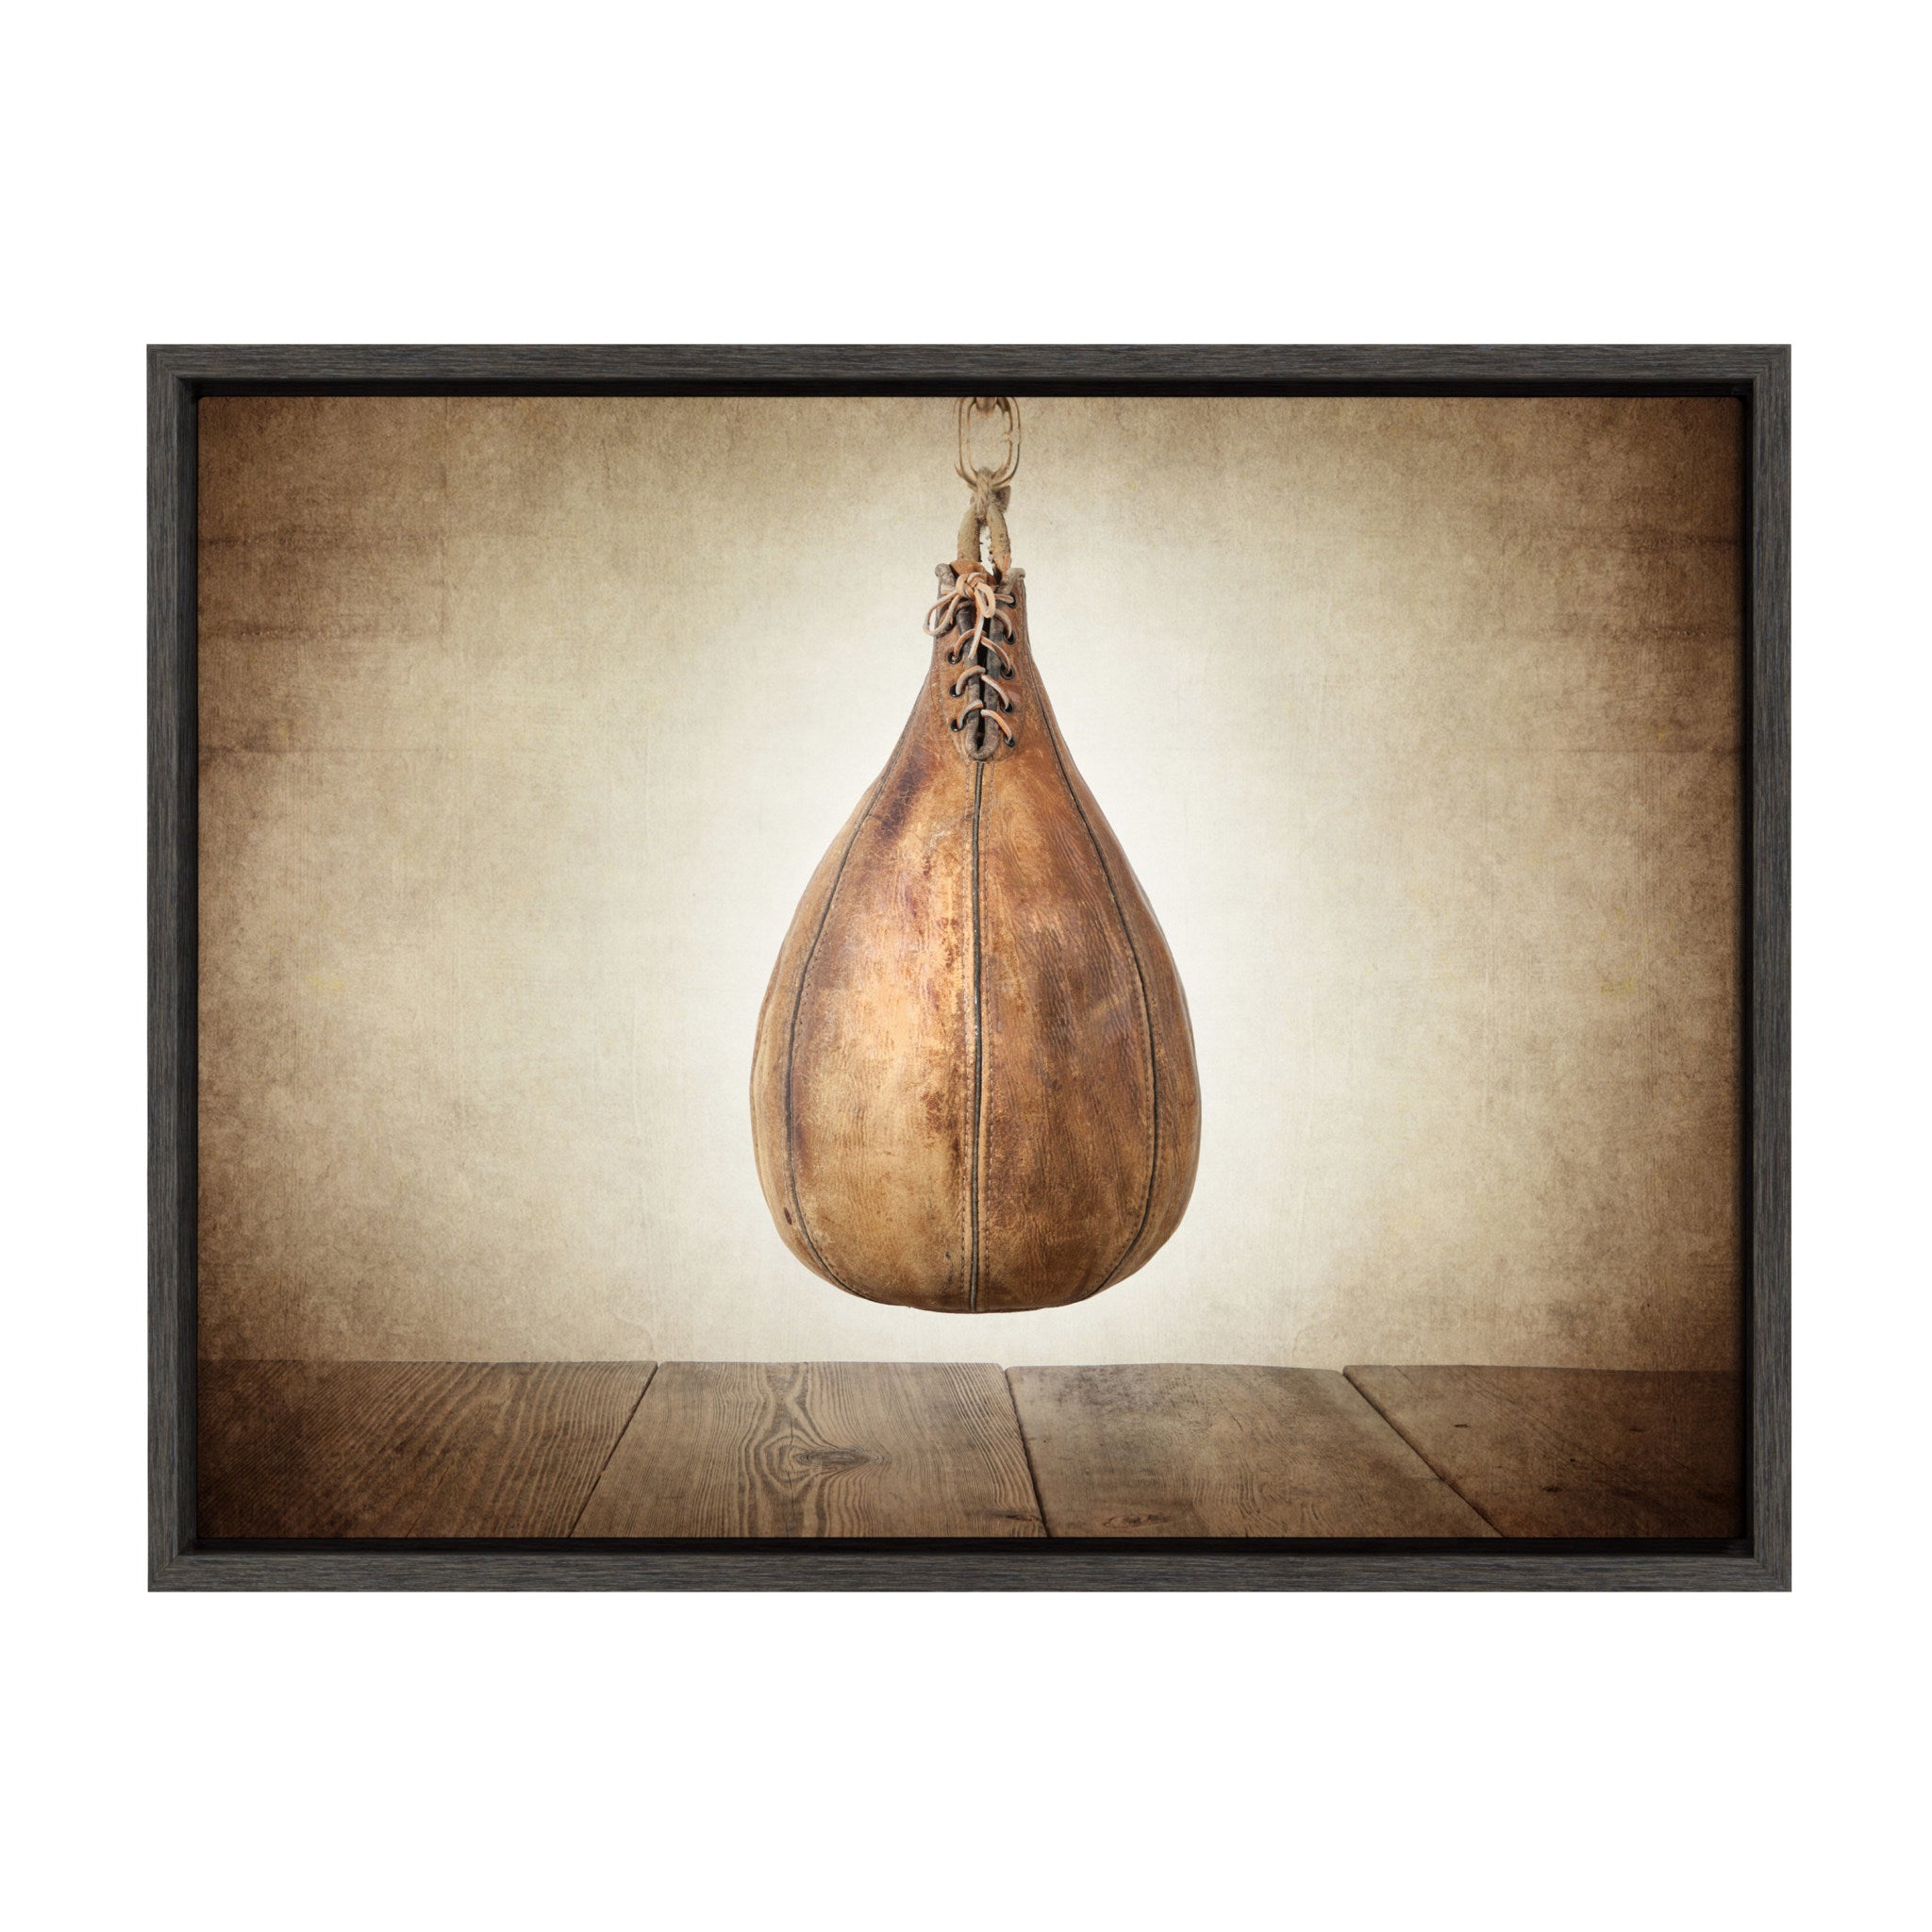 Sylvie Boxing Speedbag Framed Canvas by Shawn St. Peter